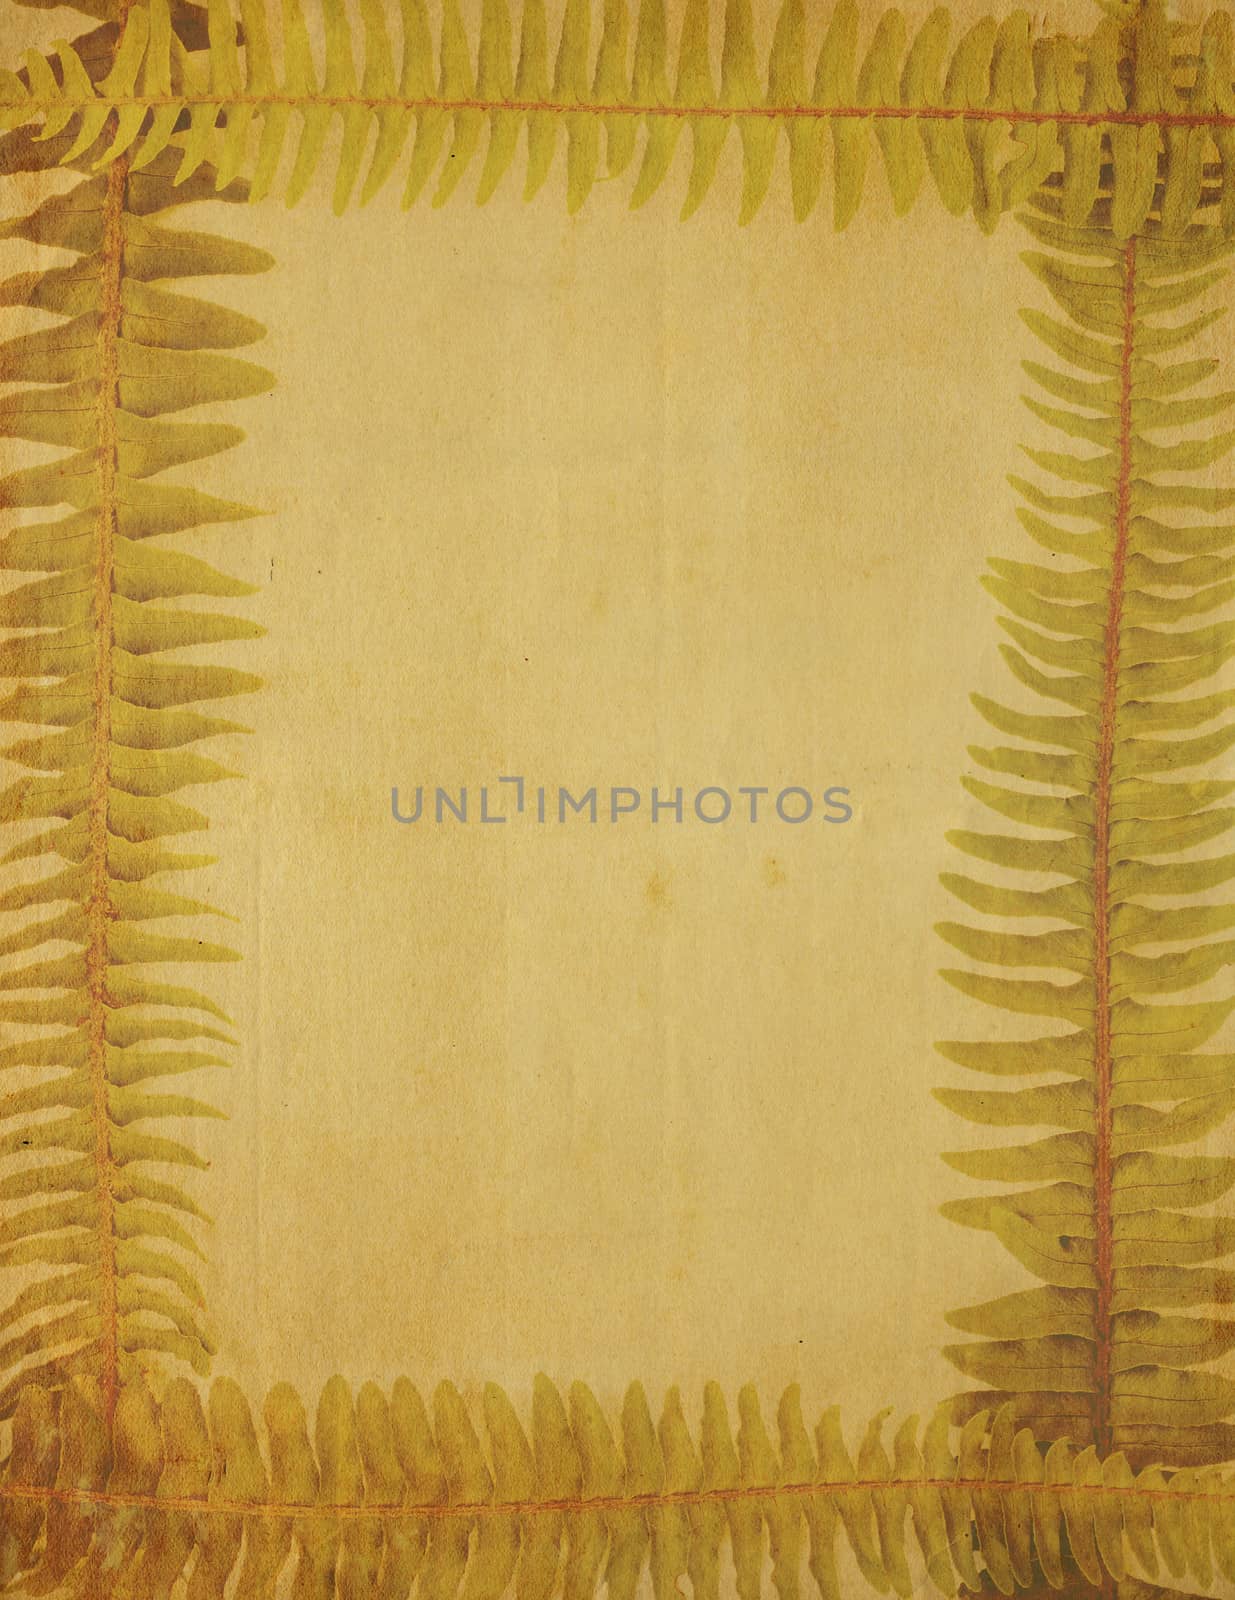 Very Old, Yellowed Image of Paper Framed With Fern Border by Em3